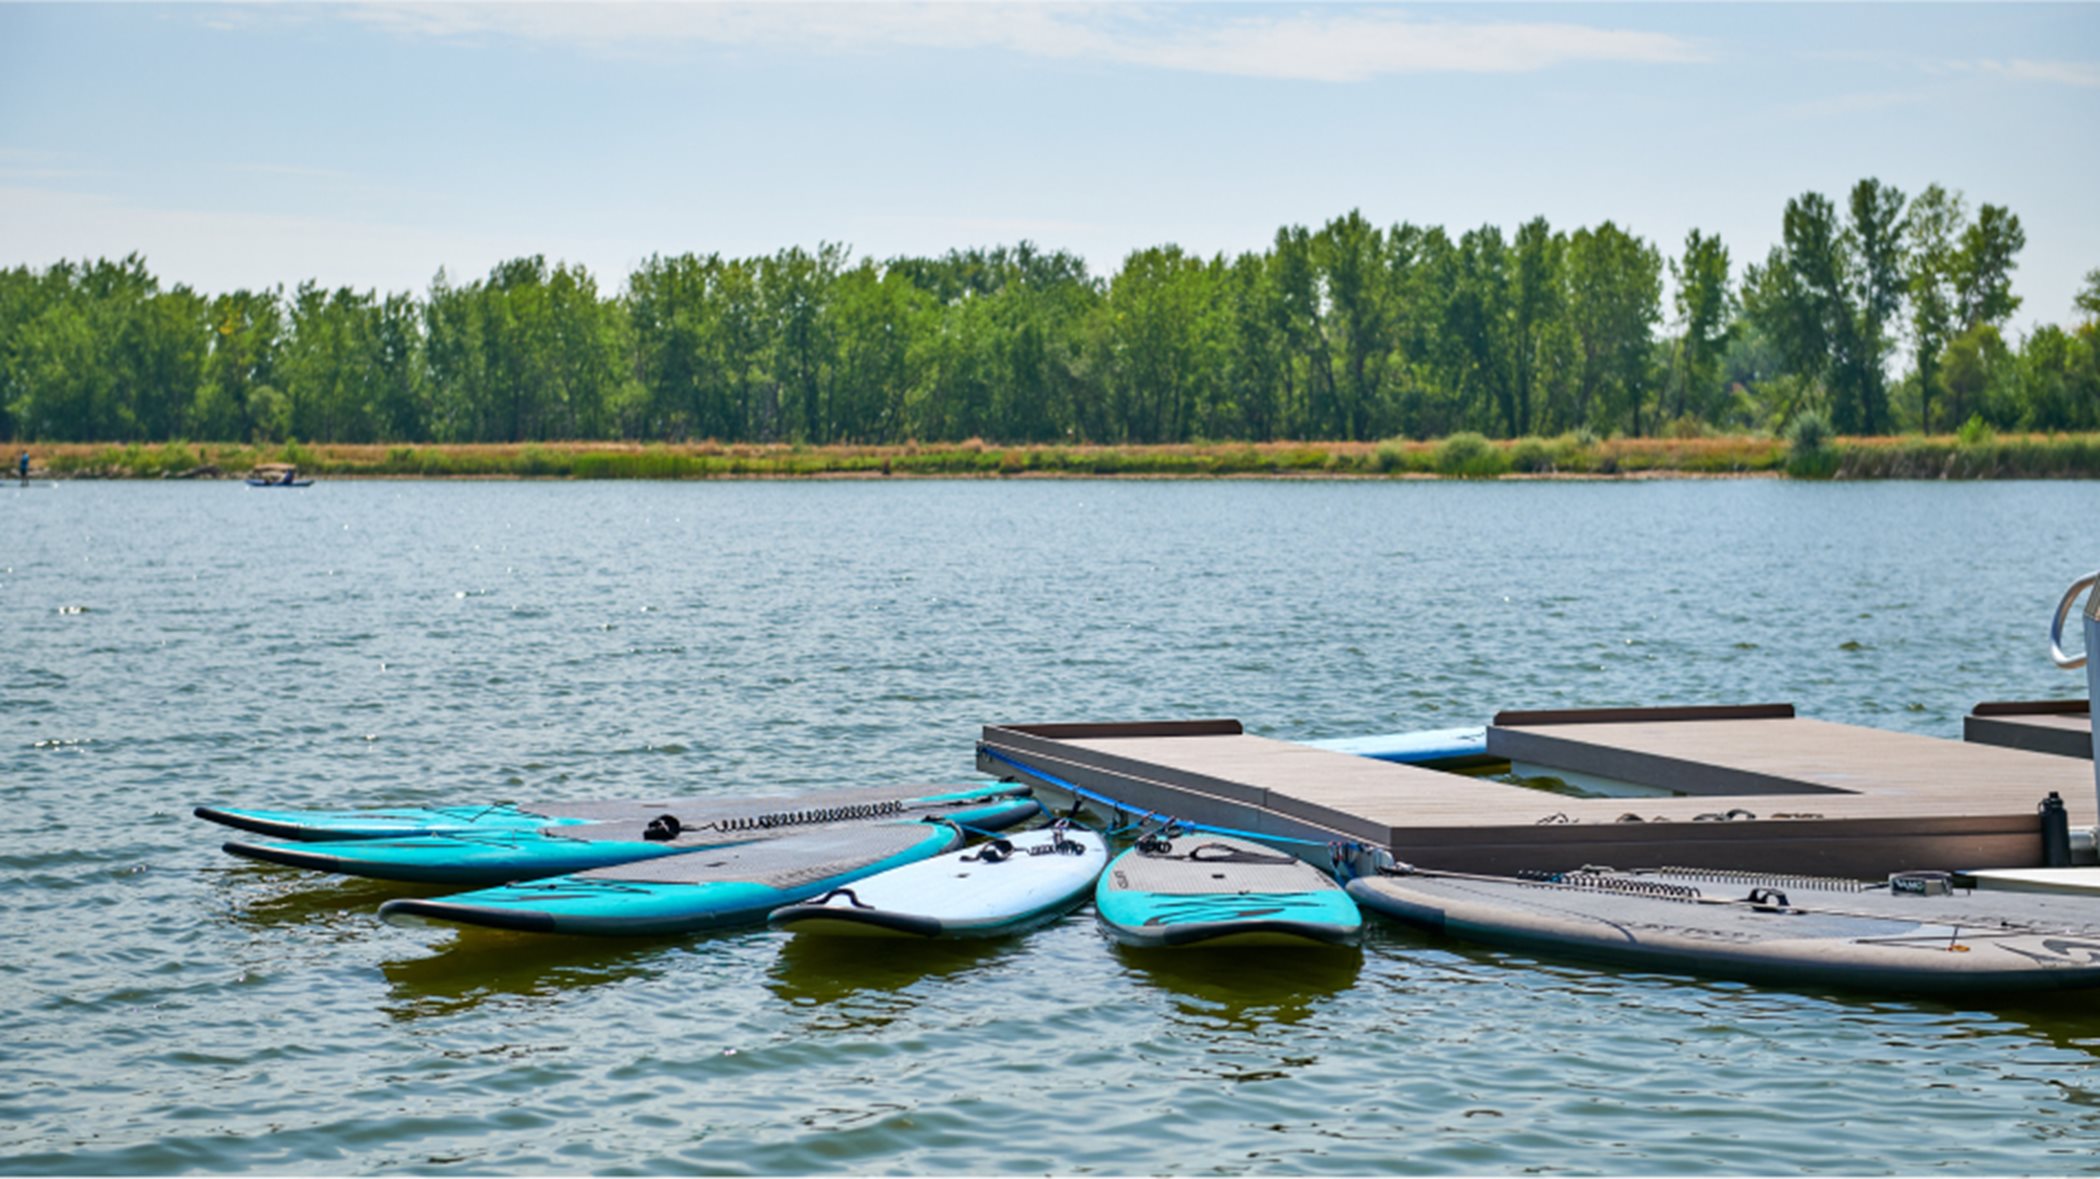 Barefoot Lakes lake amenity with paddle boards in water